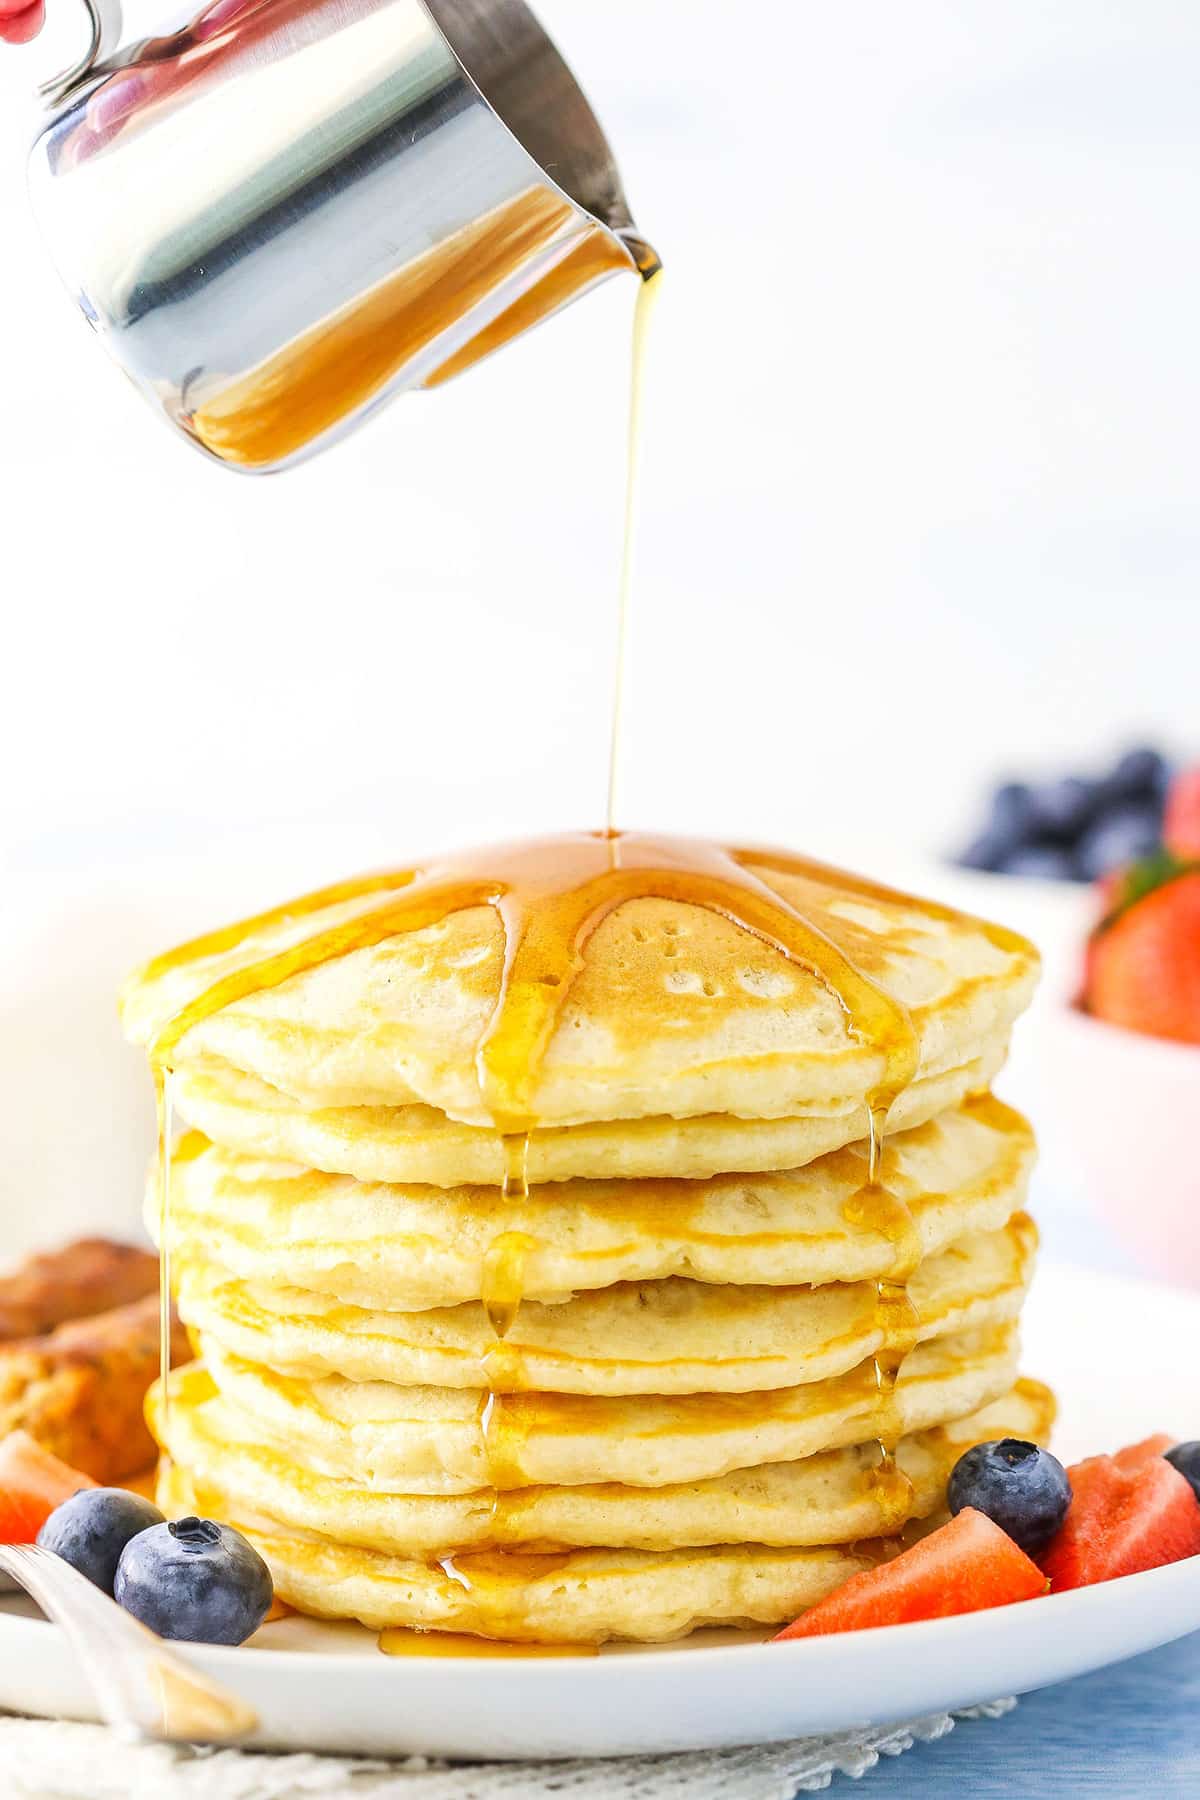 Pouring syrup over Seven Fluffy Homemade Pancakes stacked on a white plate